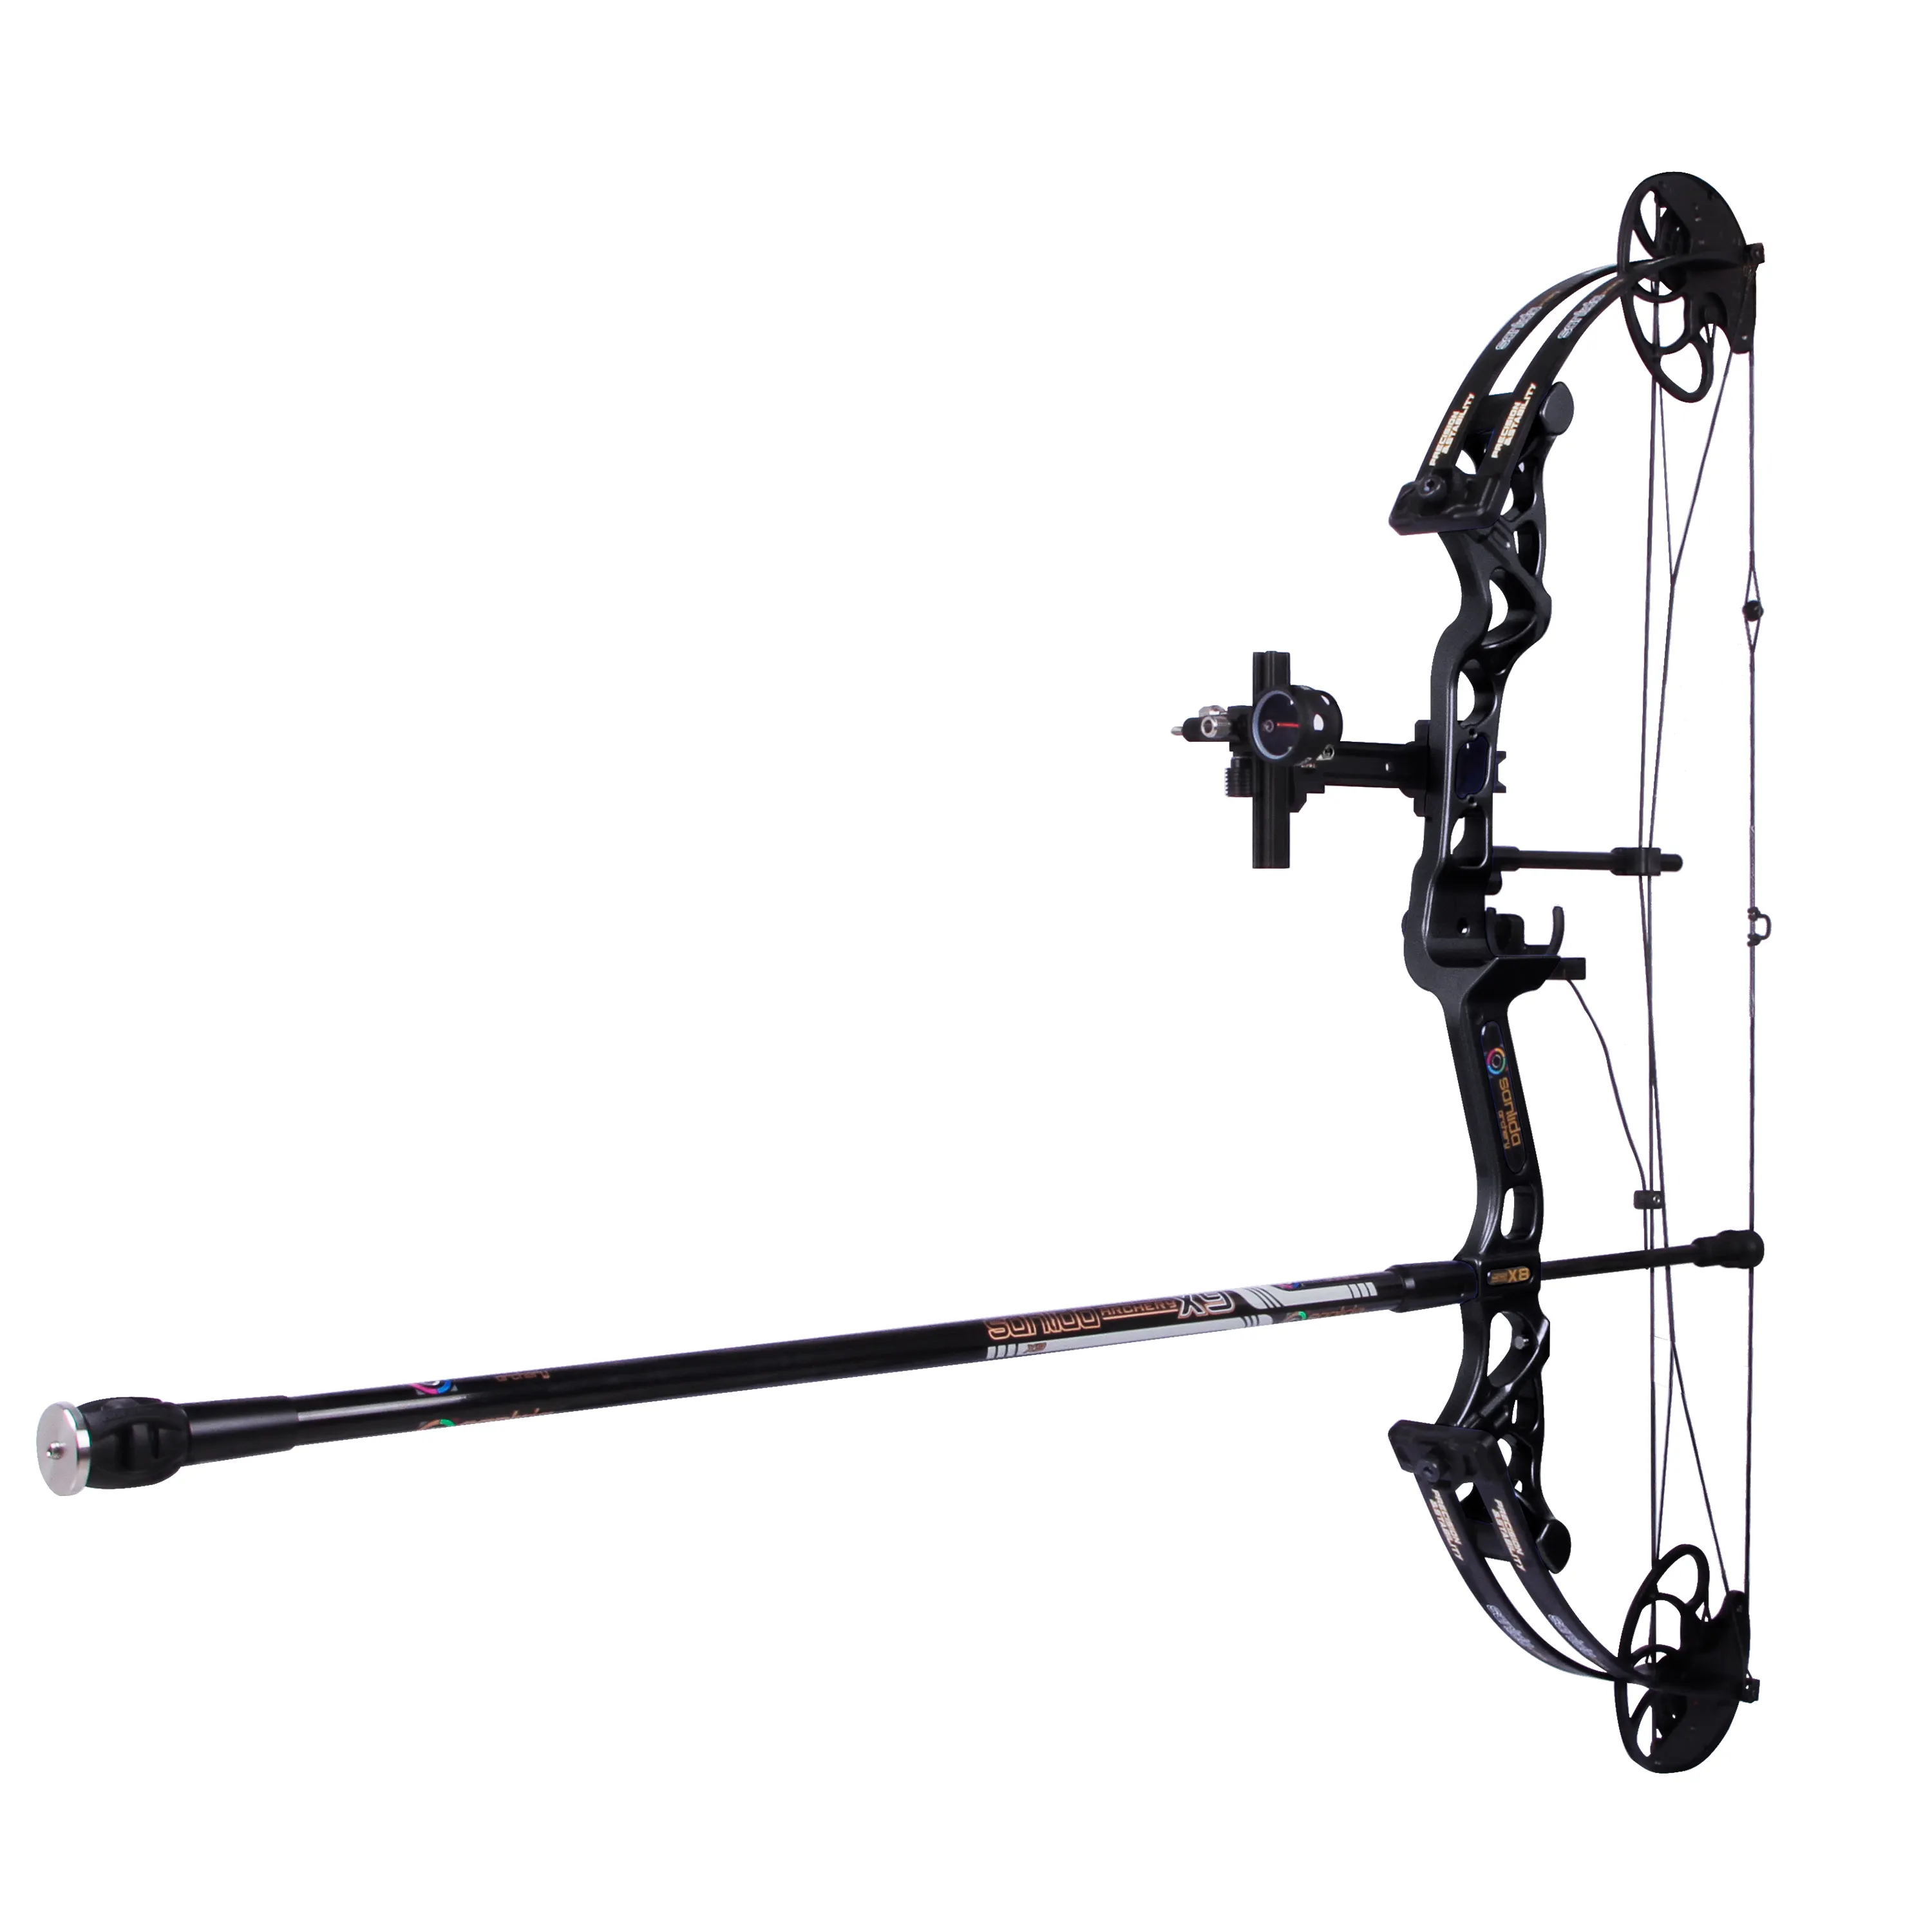 Sanlida Archery X8 Target Compound Bow and Arrow Beginner Beginner Kit for Youth and Ladies